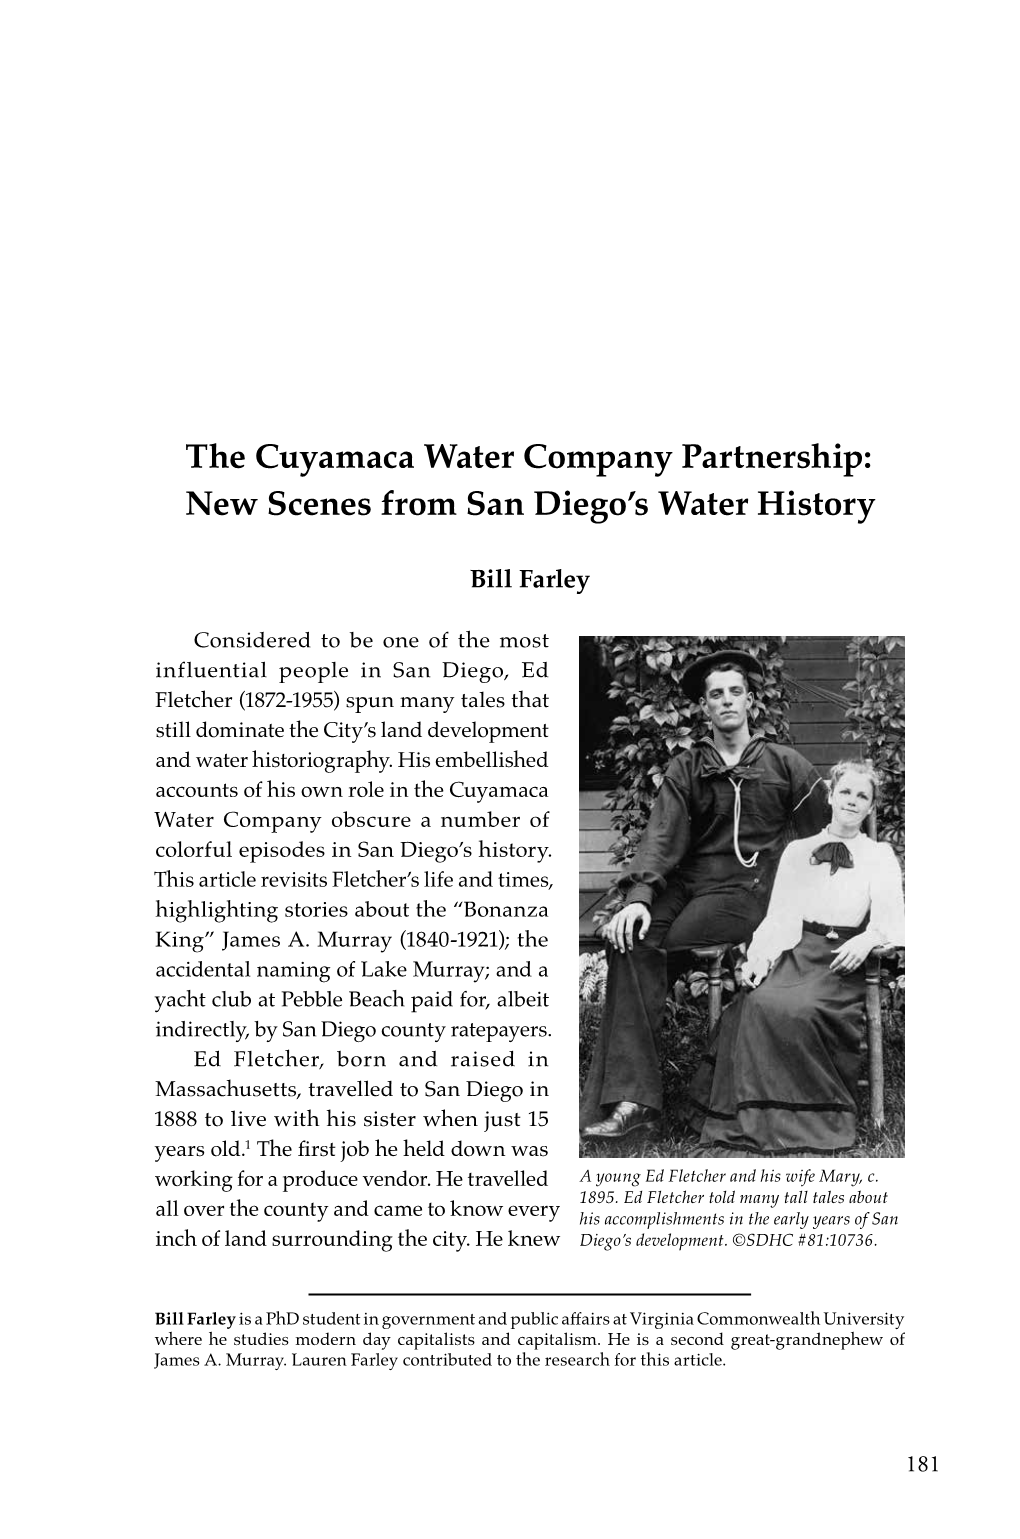 The Cuyamaca Water Company Partnership: New Scenes from San Diego’S Water History